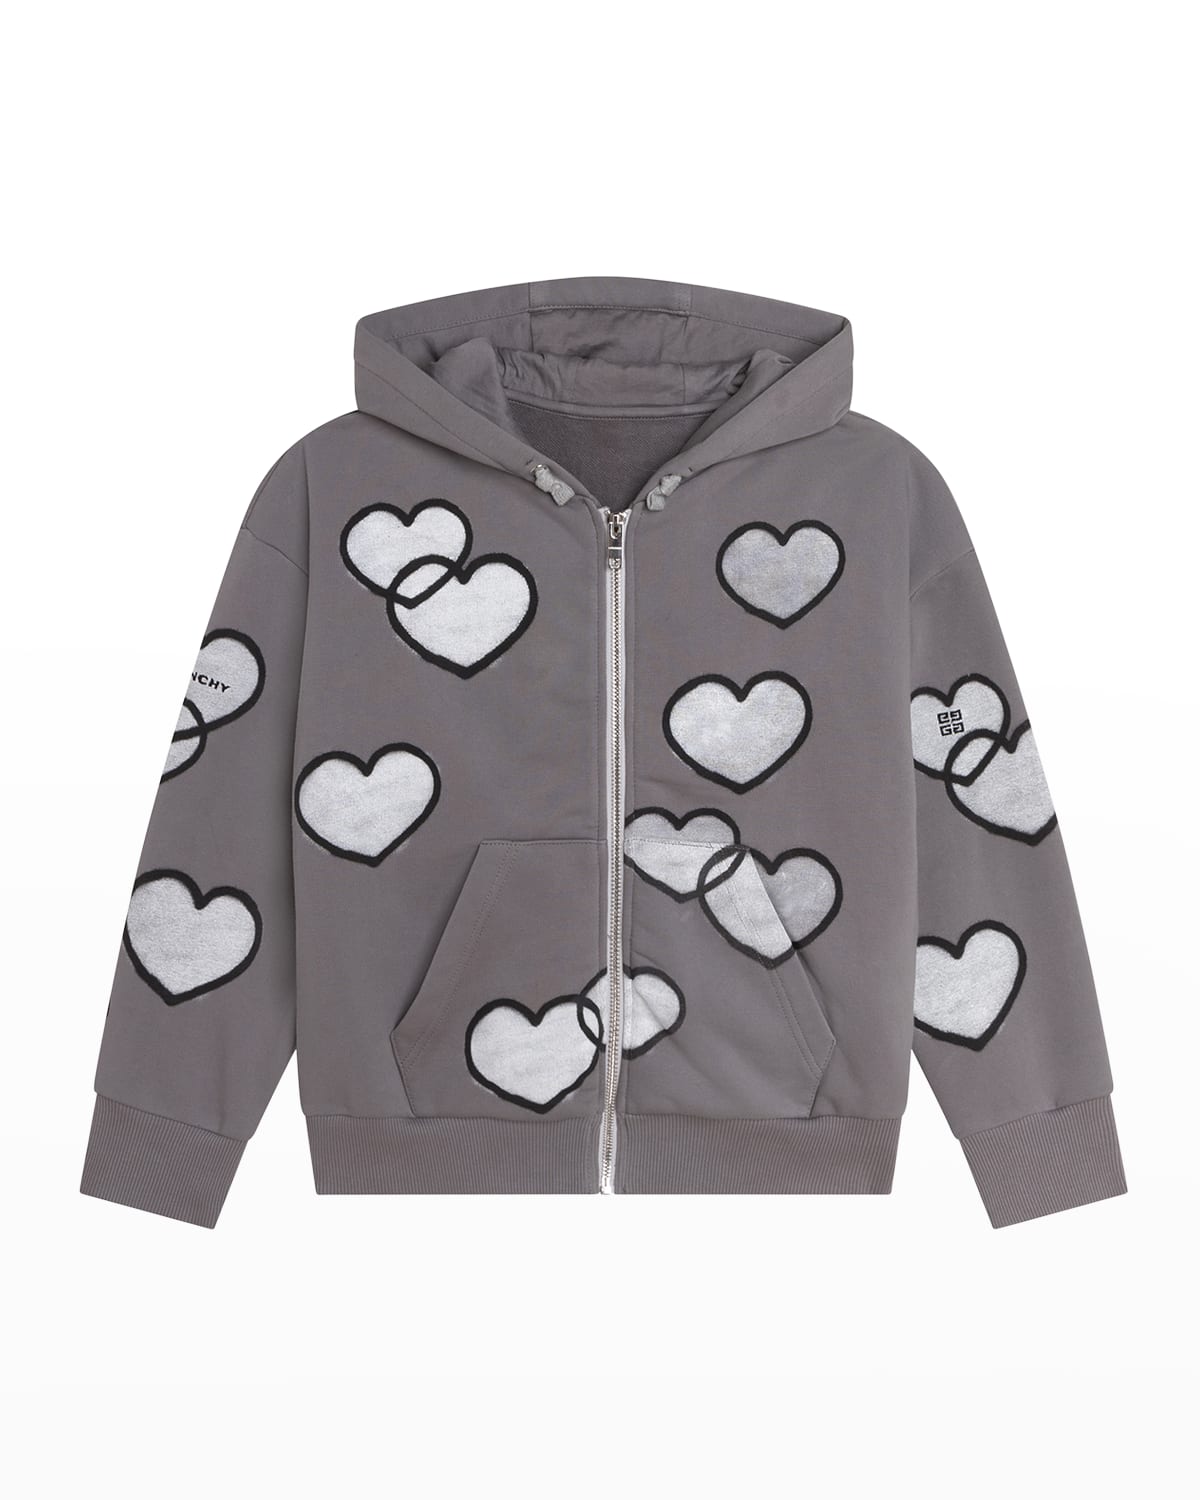 Givenchy x CHITO Girl's Hearts Graphic Hoodie, Size 8-14 | Neiman Marcus